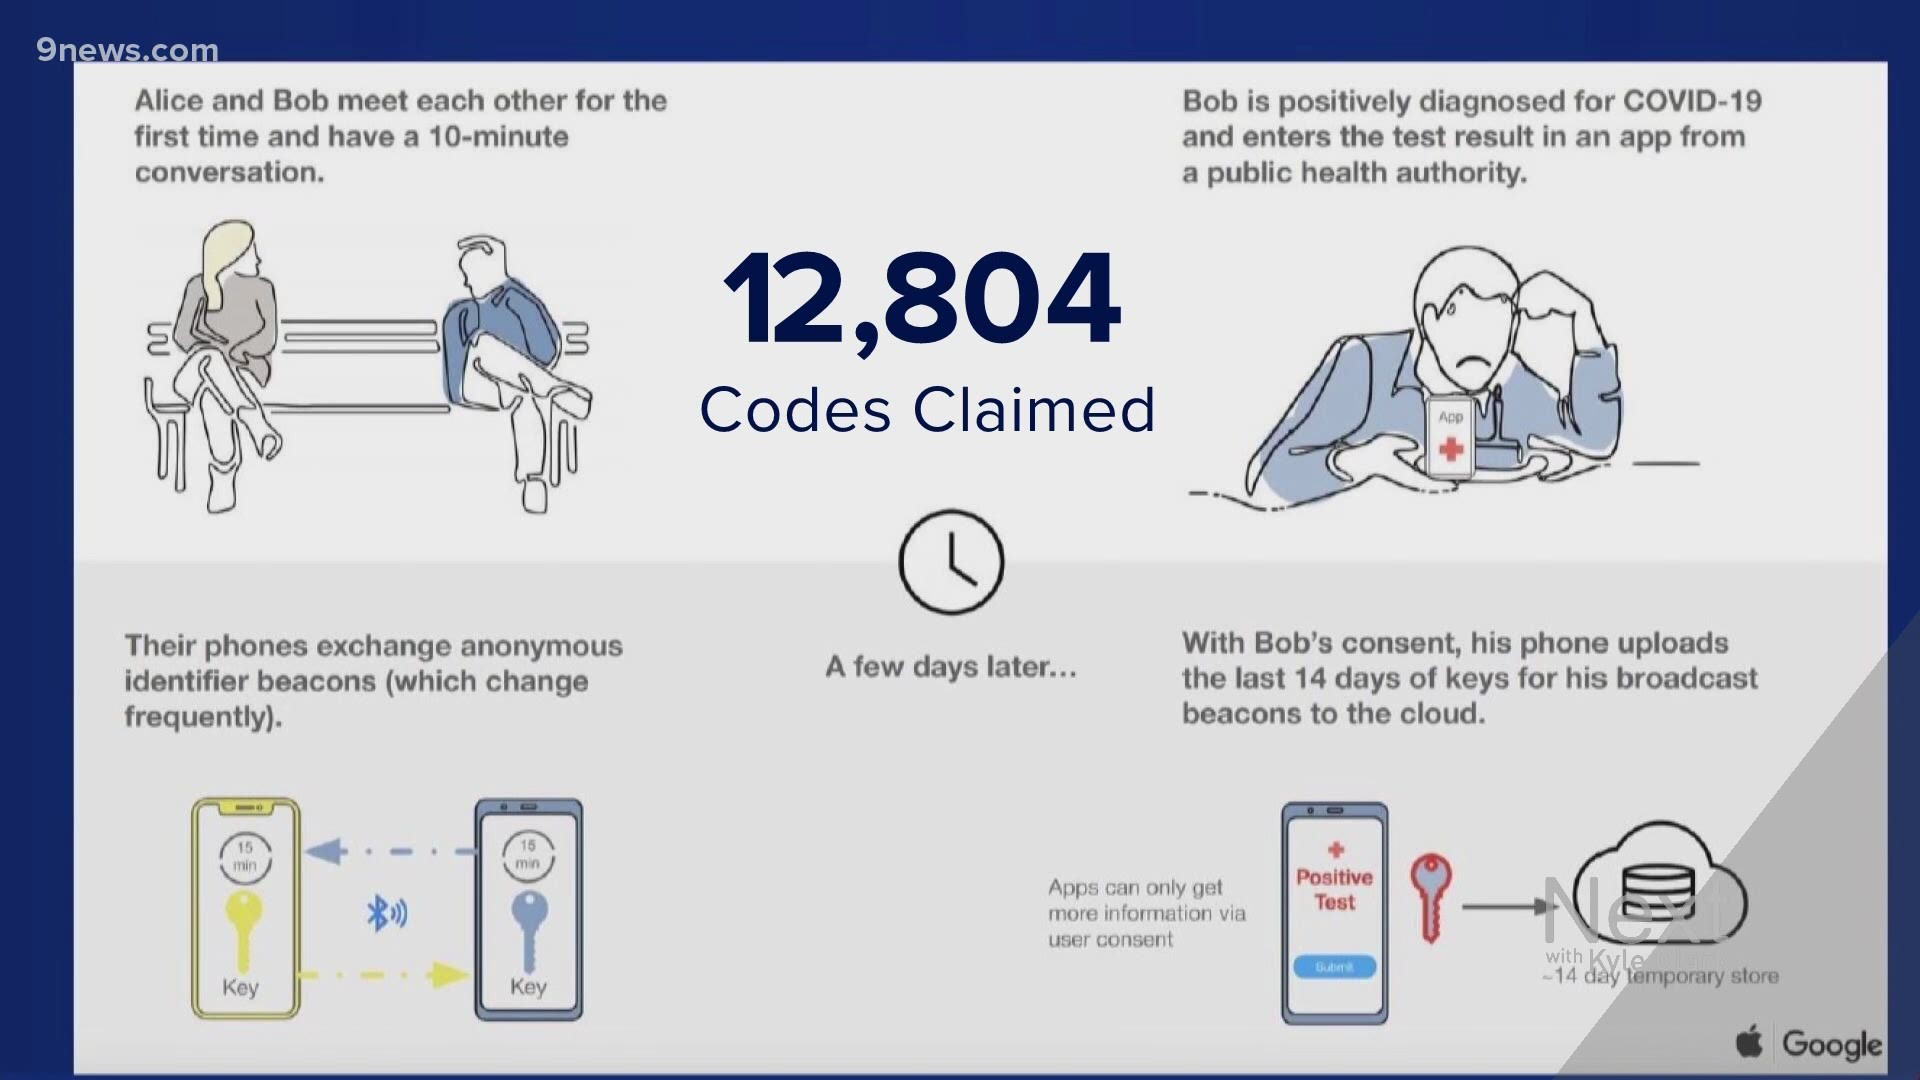 There are more than 1.4 million people in Colorado who have the COVID-19 exposure notifications app on their phones, but the number to use it is much fewer.